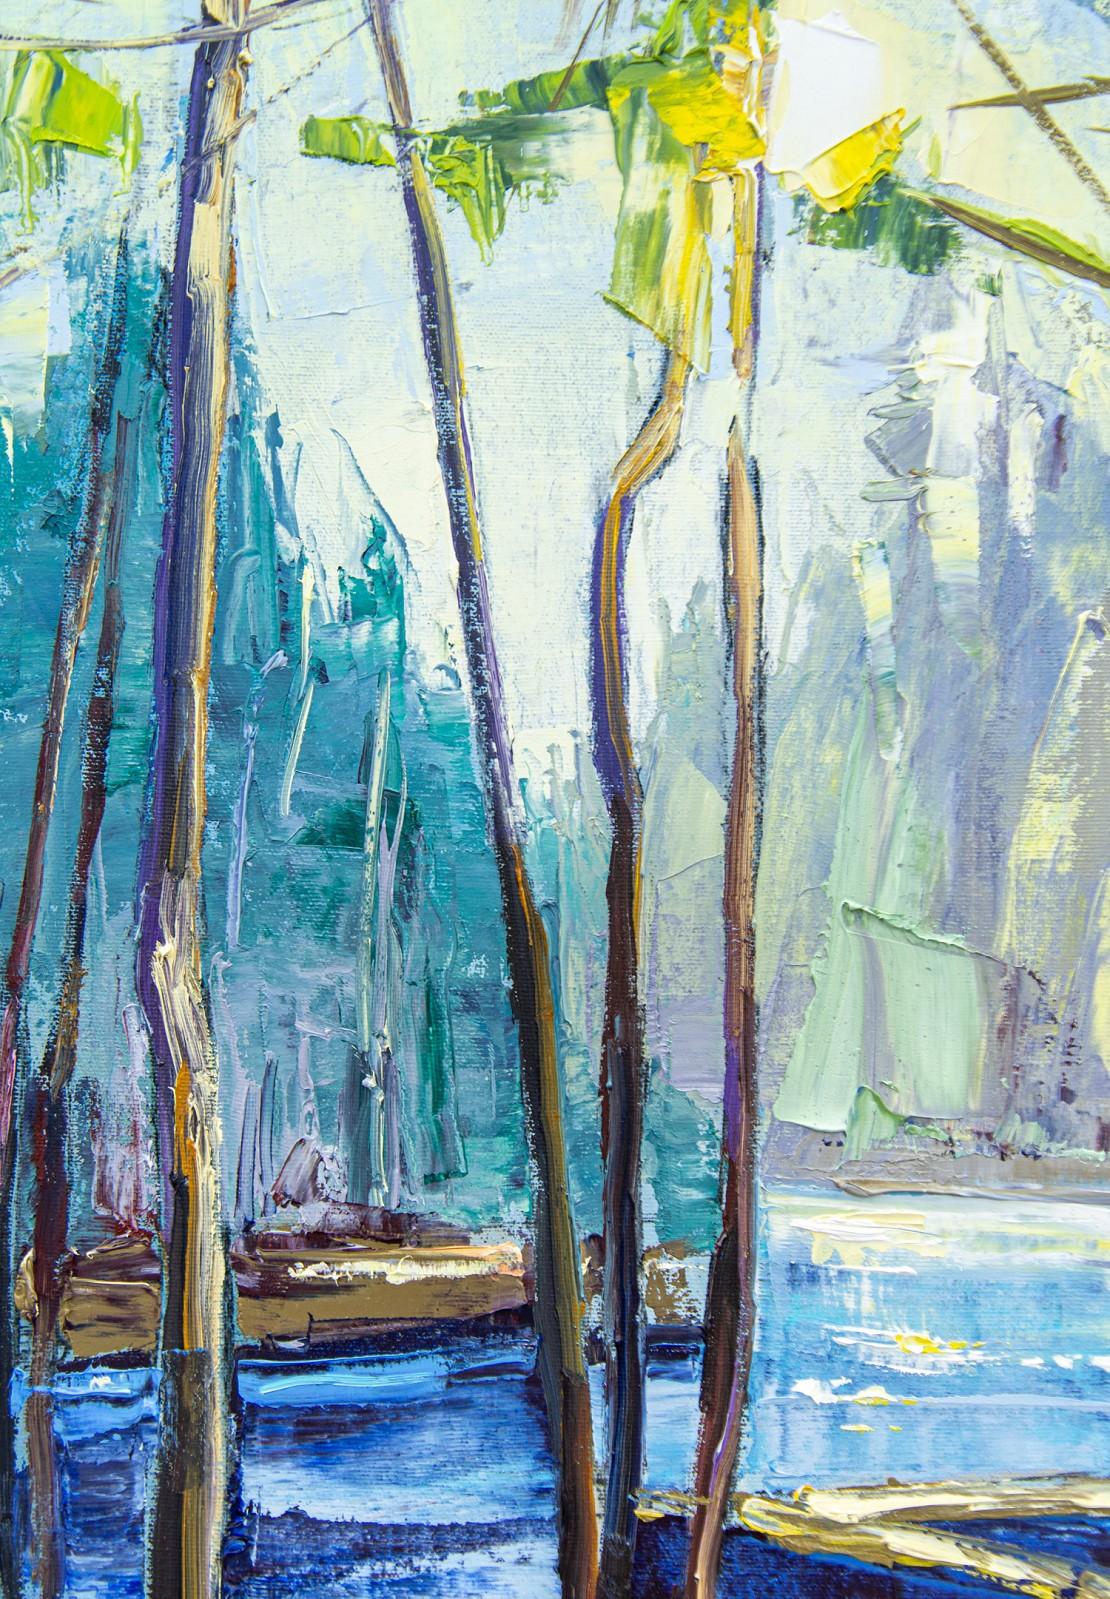 This stunning landscape is Julie Himel’s memory of a day spent hiking deep in the ancient woods of British Columbia. She was struck by the cycle of life apparent in the old fallen trees, the fresh new growth and the lake. Tall trees line the shore